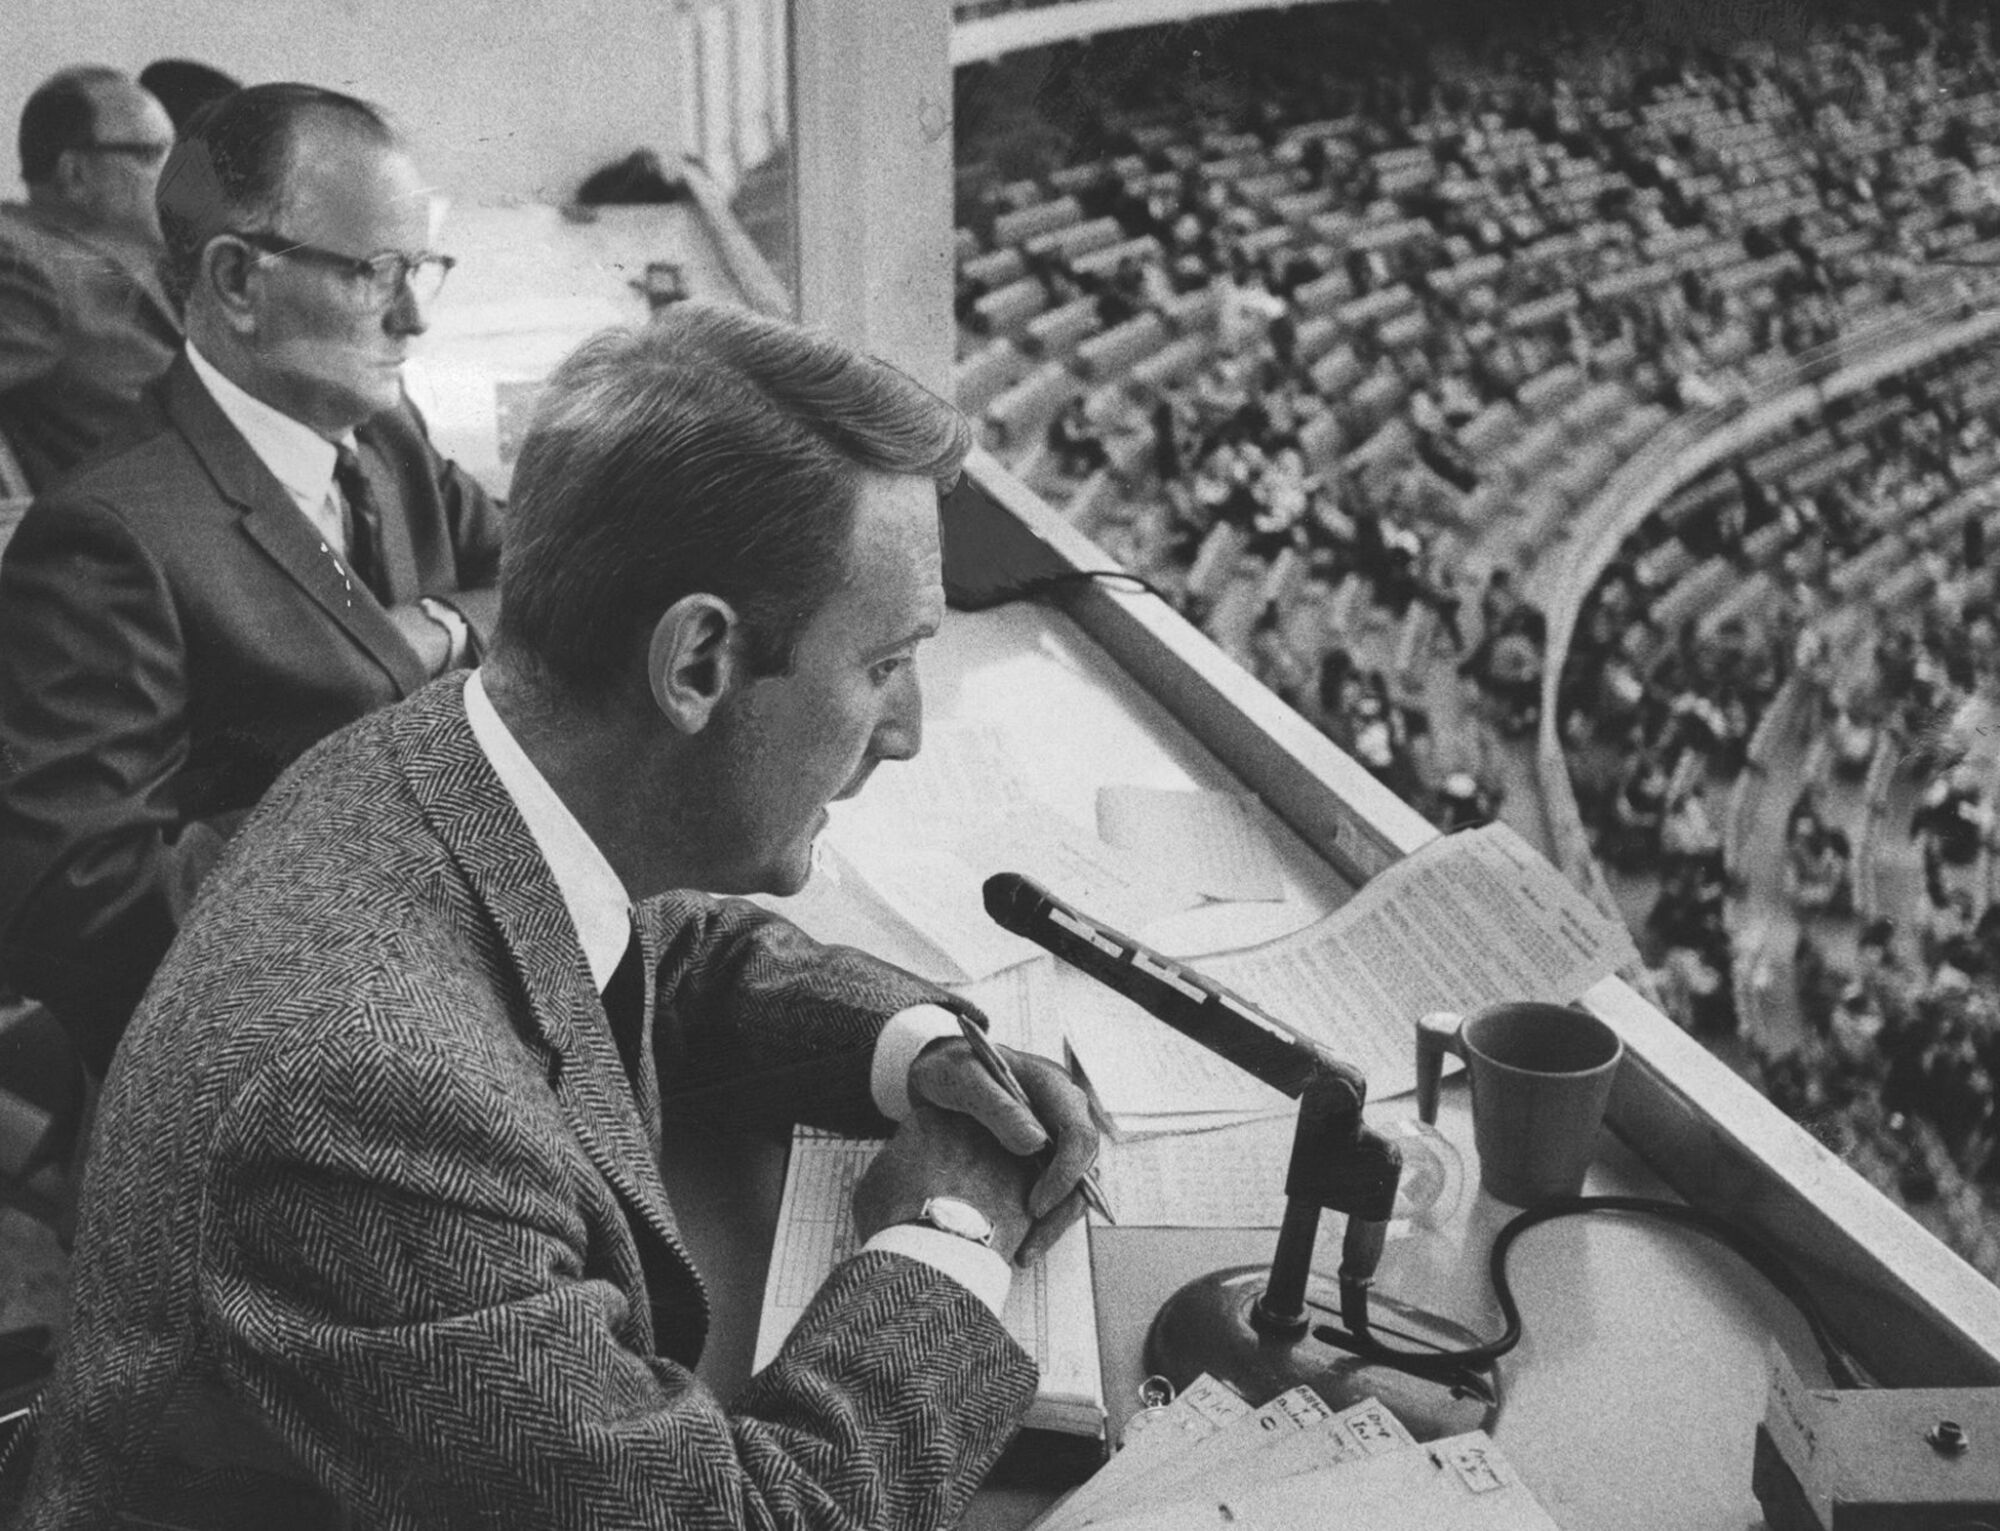 Vin Scully names a Dodgers game in 1967. His soothing banter has been likened to a warm breeze.